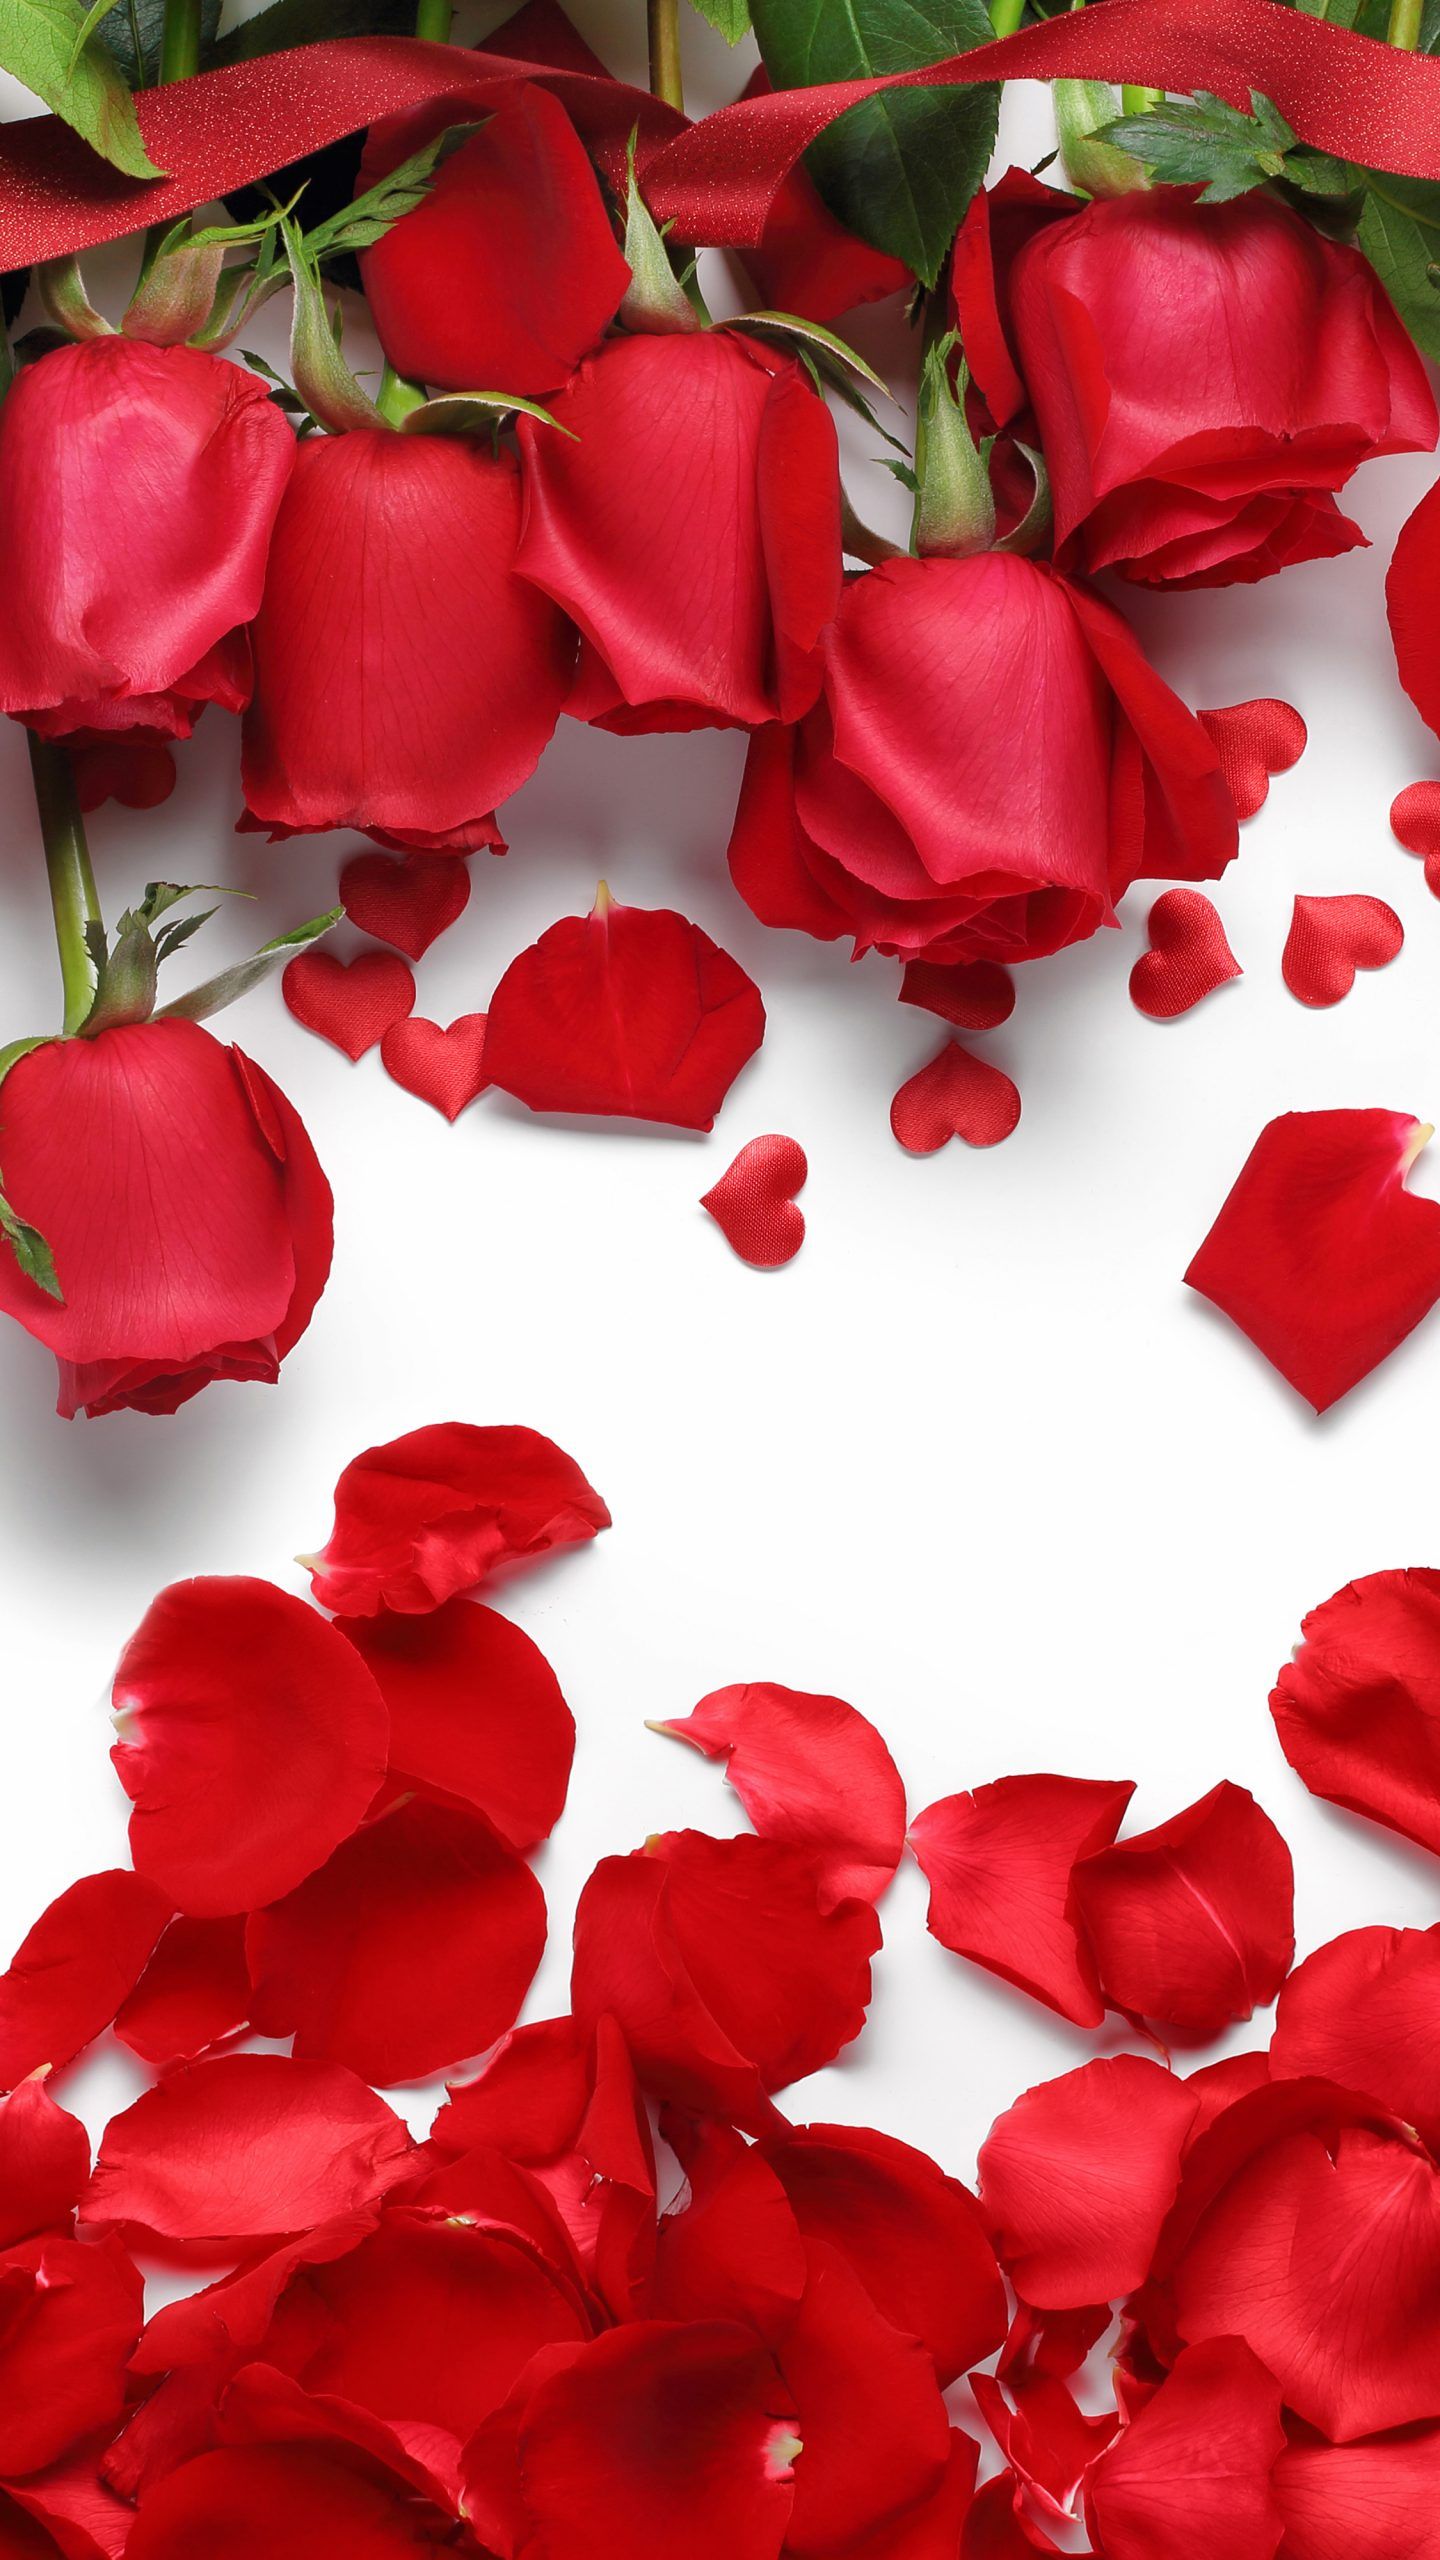 beautiful red roses on a white background